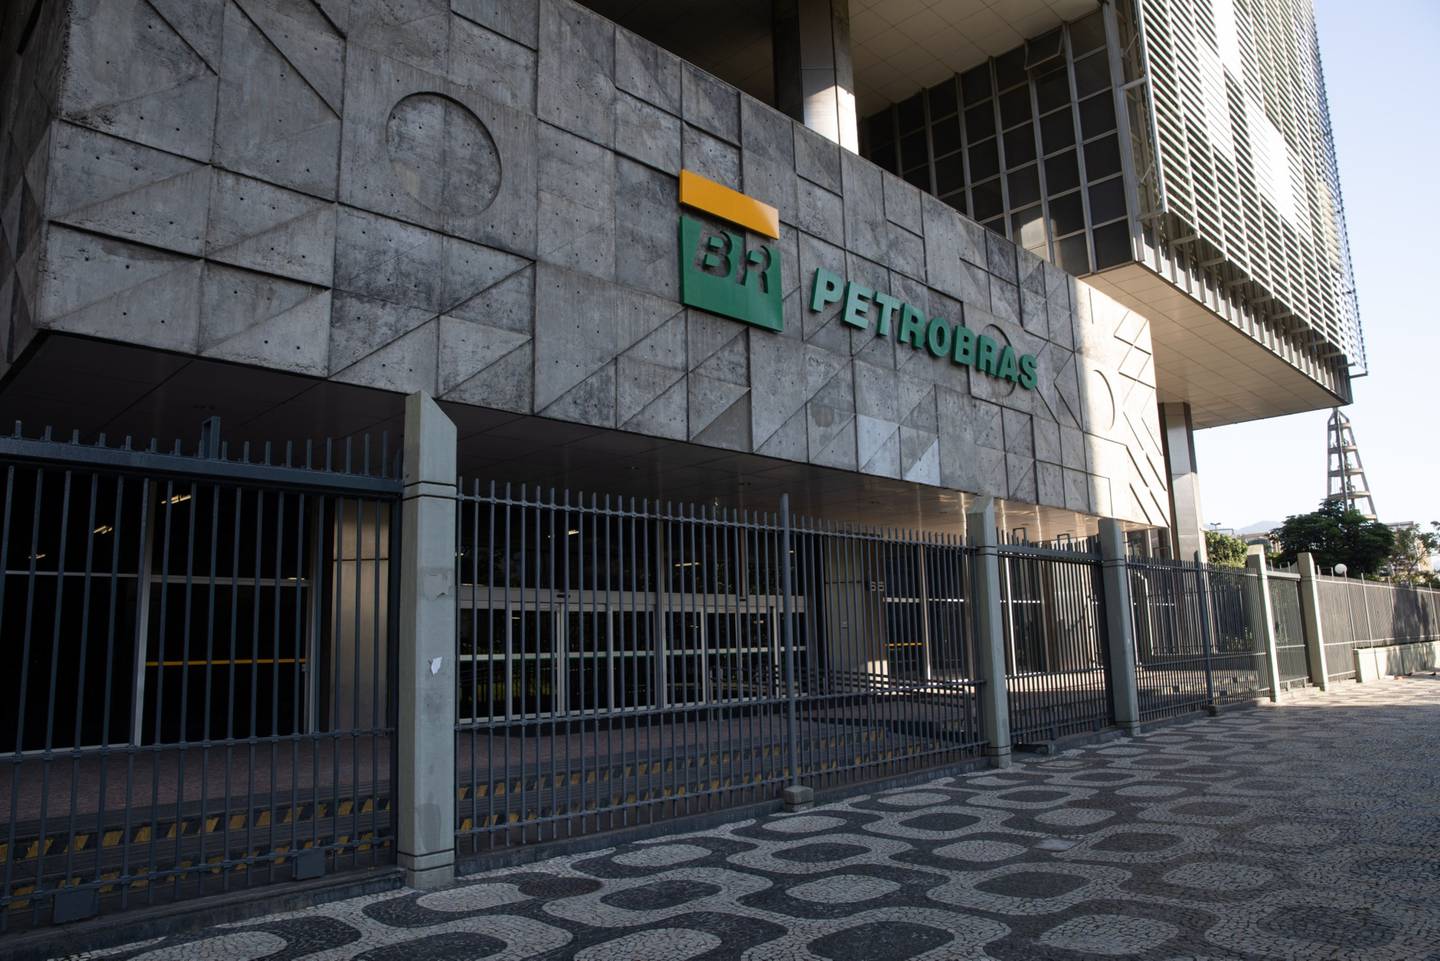 Petroleo Brasileiro SA (Petrobras) headquarters in Rio de Janeiro, Brazil, on Friday, June 17, 2022. Brazil's state-controlled oil giant Petrobras increased fuel prices in a political setback for President Jair Bolsonaro, who is fighting to contain inflation in an election year. Photographer: Francesca Gennari/Bloomberg